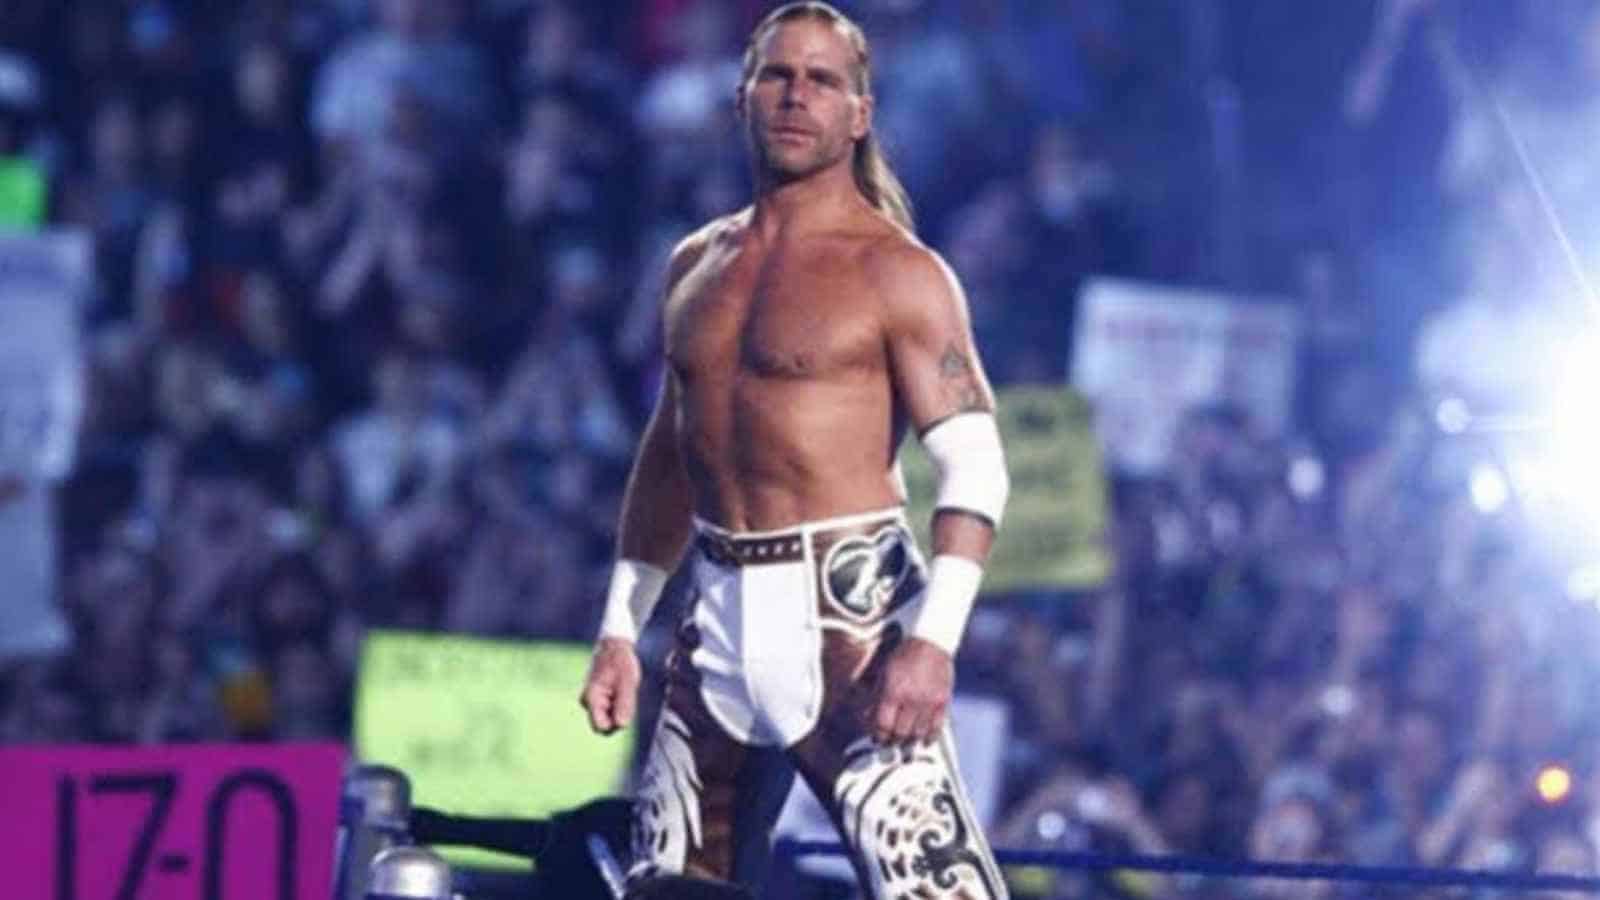 Shawn Michaels - Iconic Matches And Rivalries